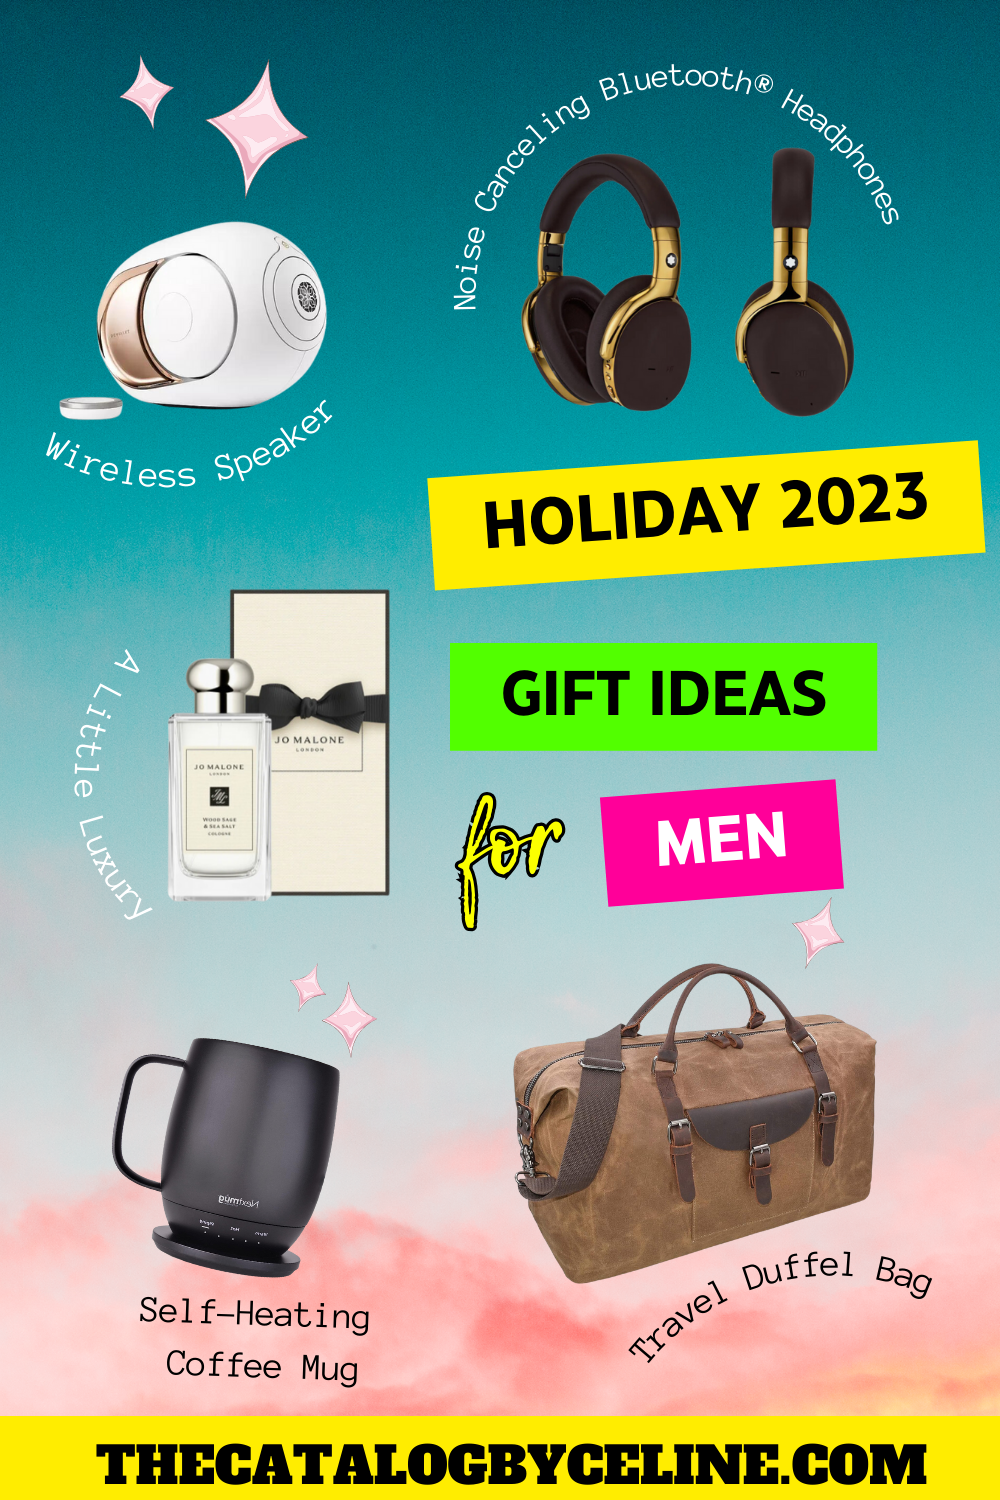 Holiday 2023 Gift Ideas for Men